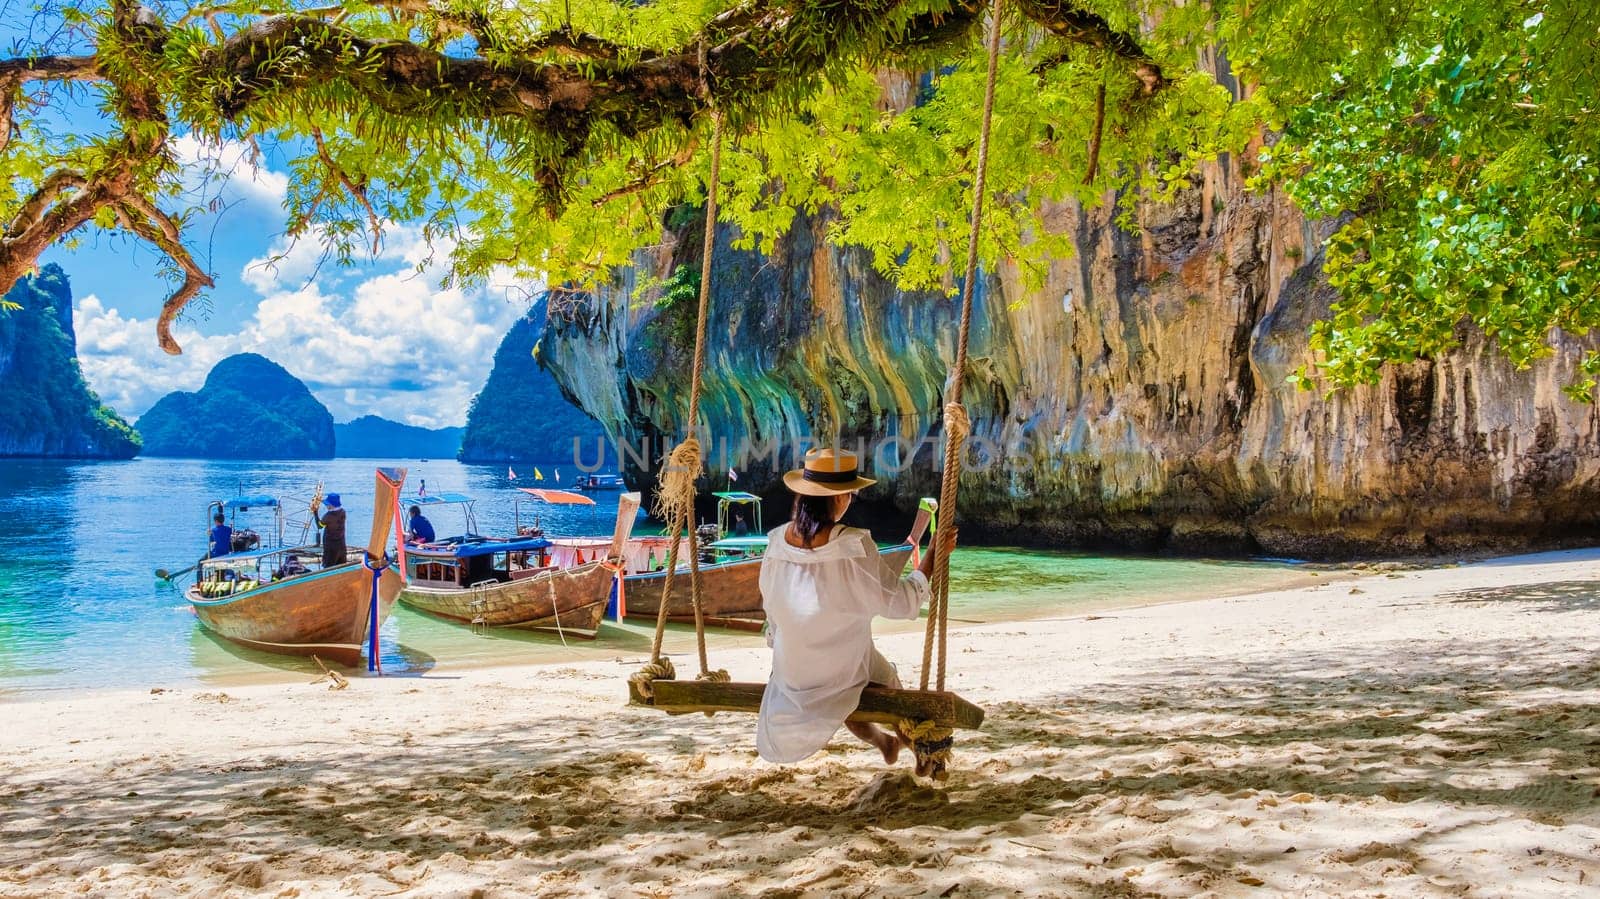 women on a swing at the Tropical lagoon of Koh Loa Lading Krabi Thailand part of the Koh Hong Islands in Thailand. beautiful beach with limestone cliffs and longtail boats on a sunny day